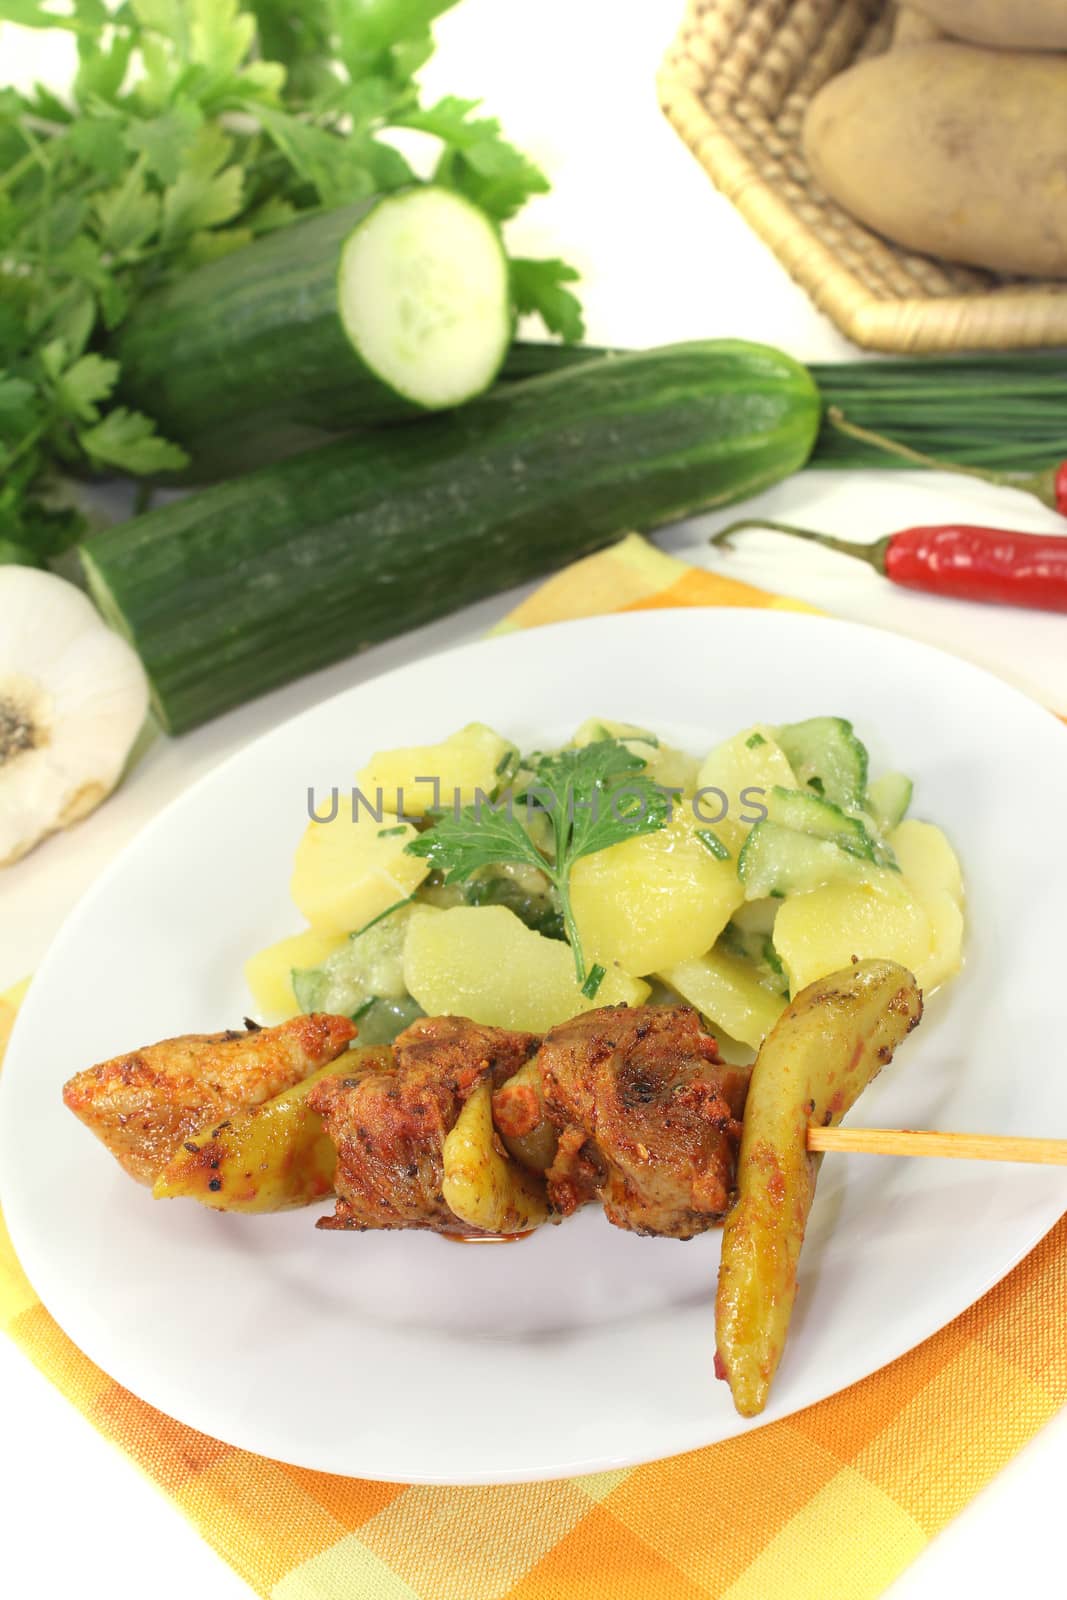 Potato-cucumber salad with fire skewers on a light background